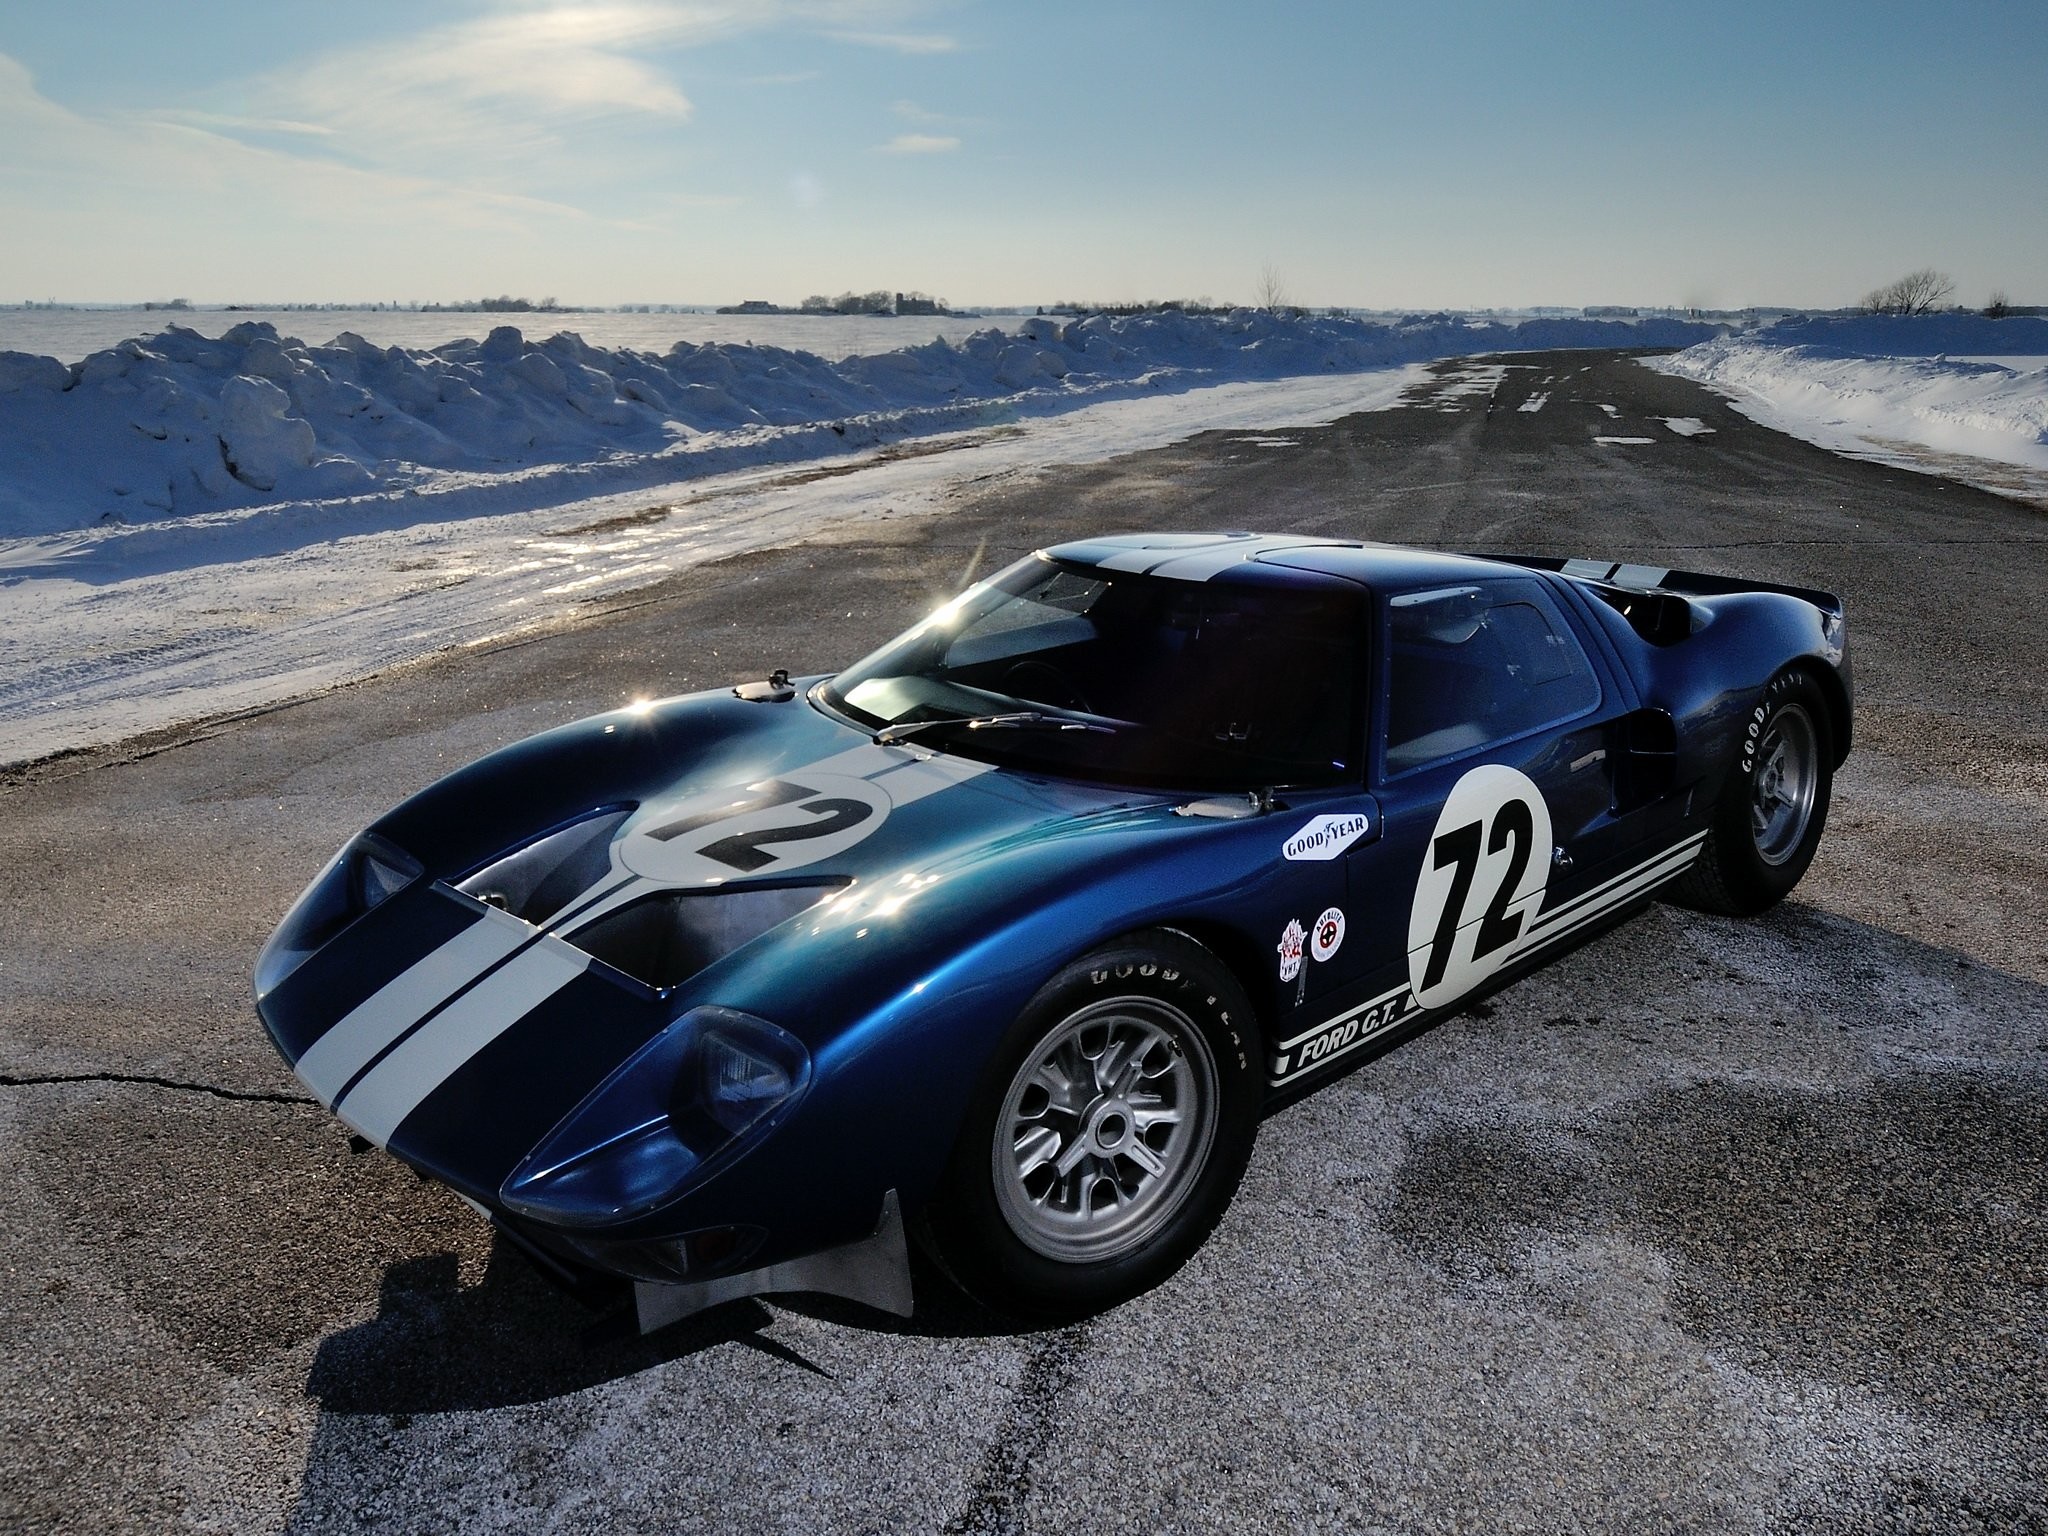 2048x1536 1964 Ford GT40 Prototype (GT104) supercar race racing classic g-t wallpaper  |  | 464442 | WallpaperUP